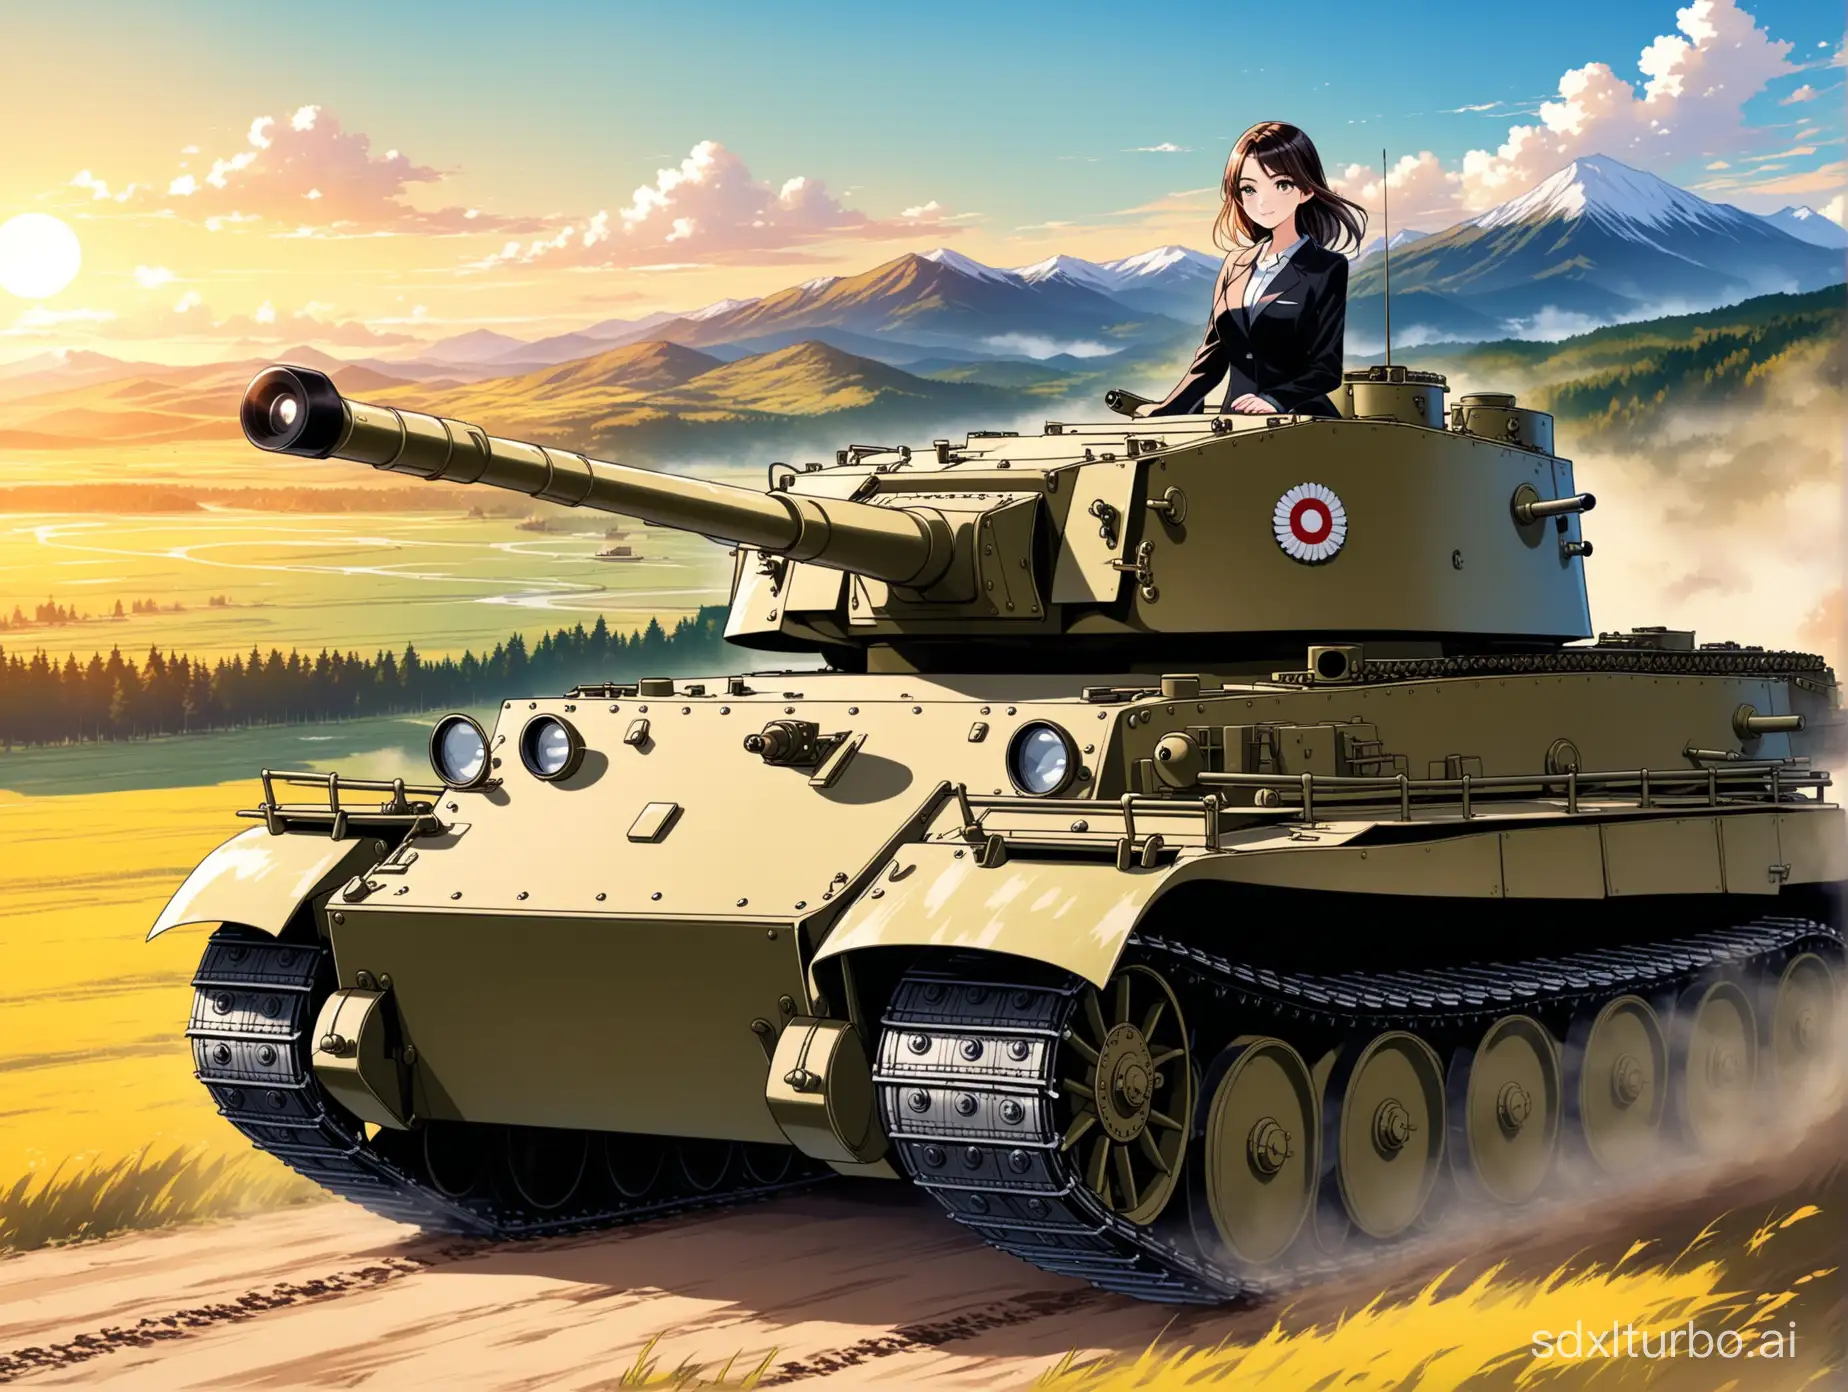 Anime-Style-Woman-in-Suit-Riding-German-Tiger-I-Tank-Through-Beautiful-Scenery